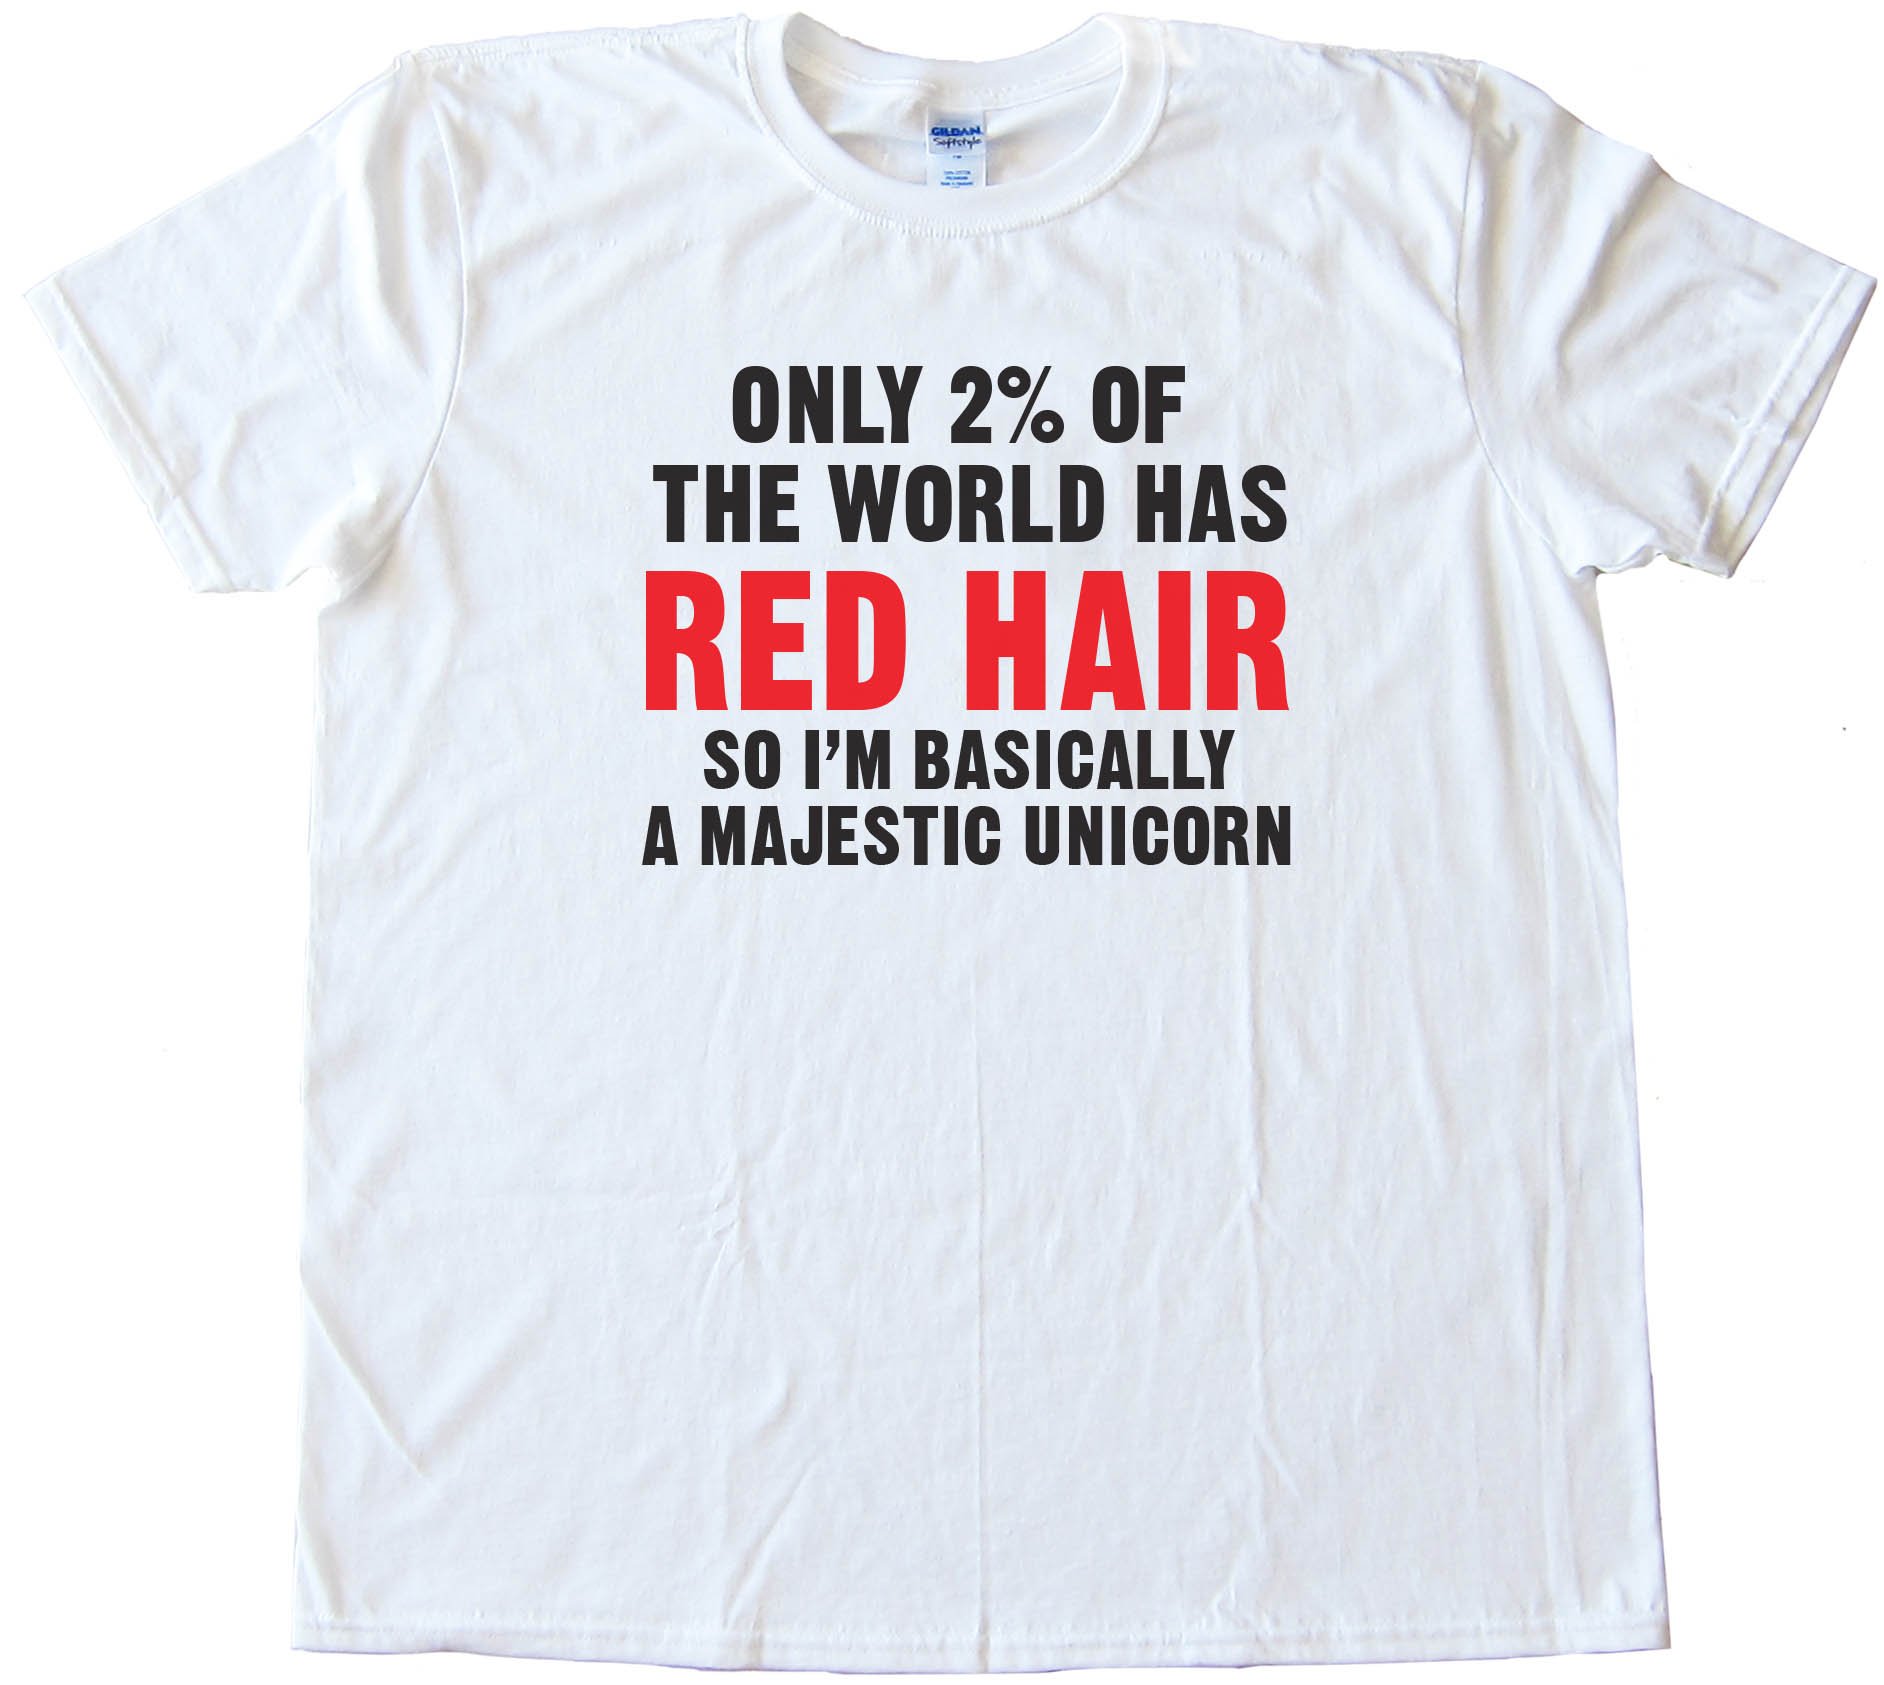 Only 2% Of The World Has Red Hair So I'M Basically A Majestic Unicorn Tee Shirt